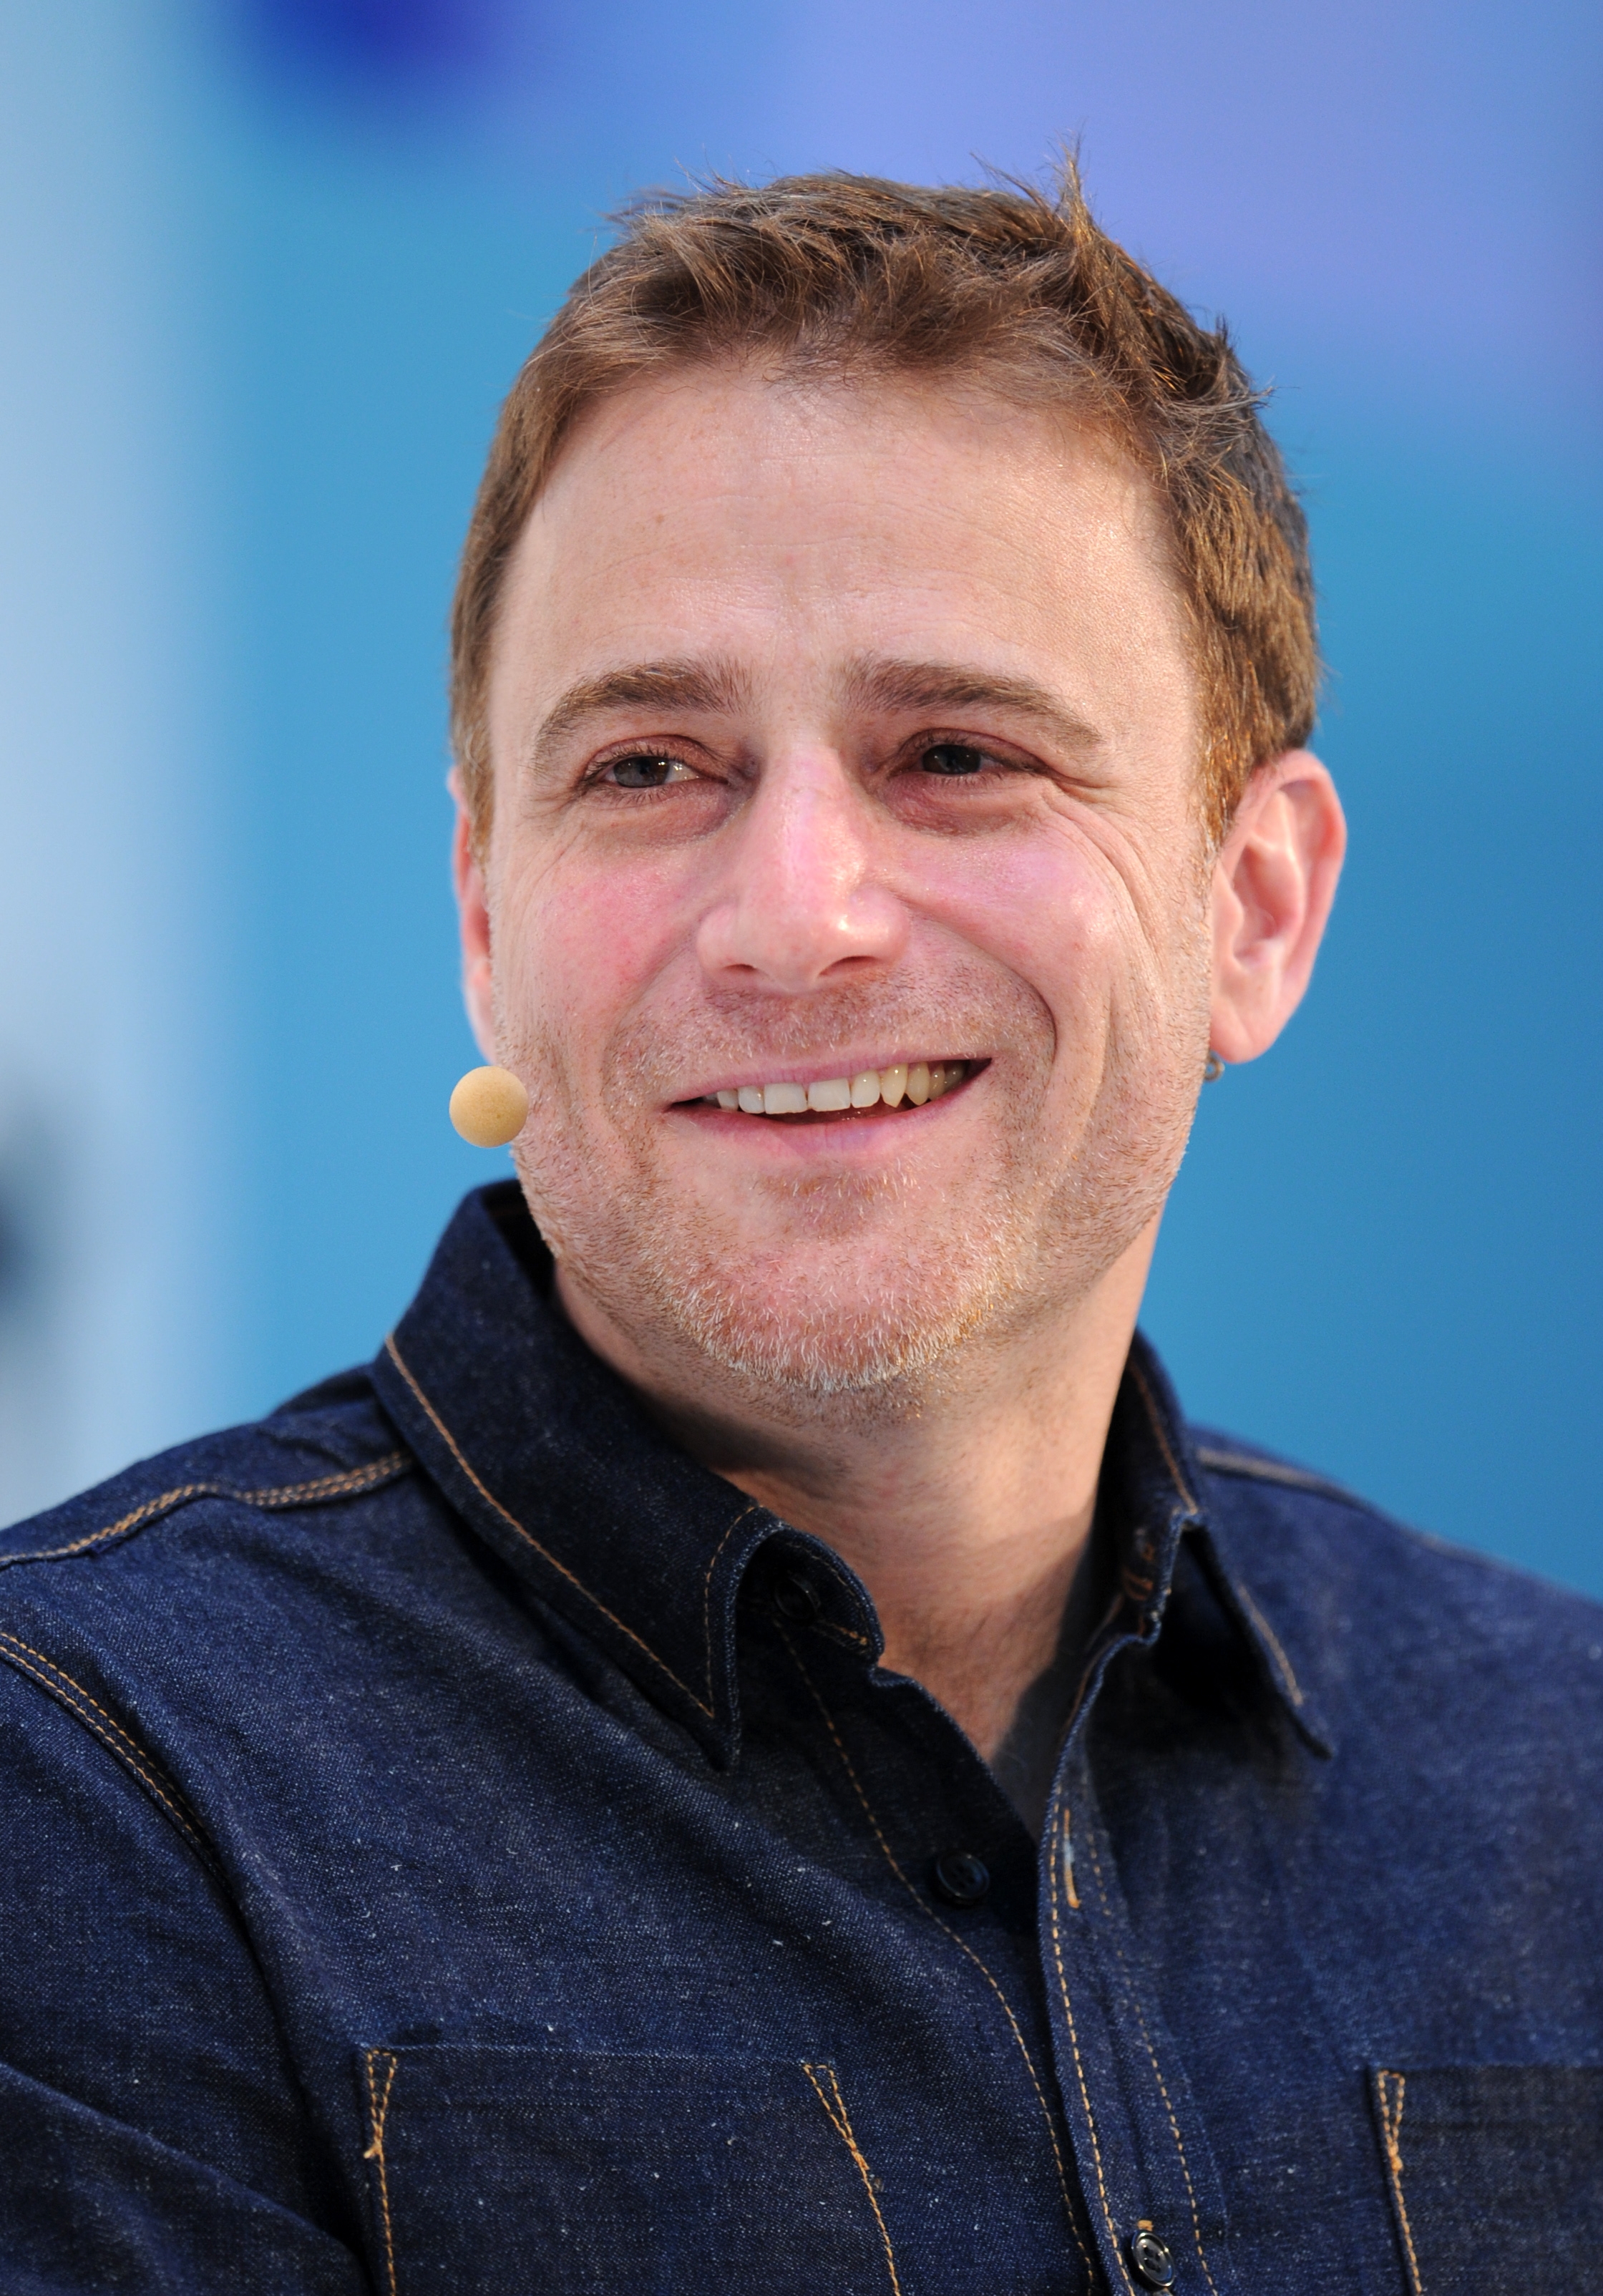 Stewart Butterfield, co-founder and CEO of Slack, speaks at the DLD (Digital-Life-Design) Conference in Munich, Germany on Jan. 19, 2015.